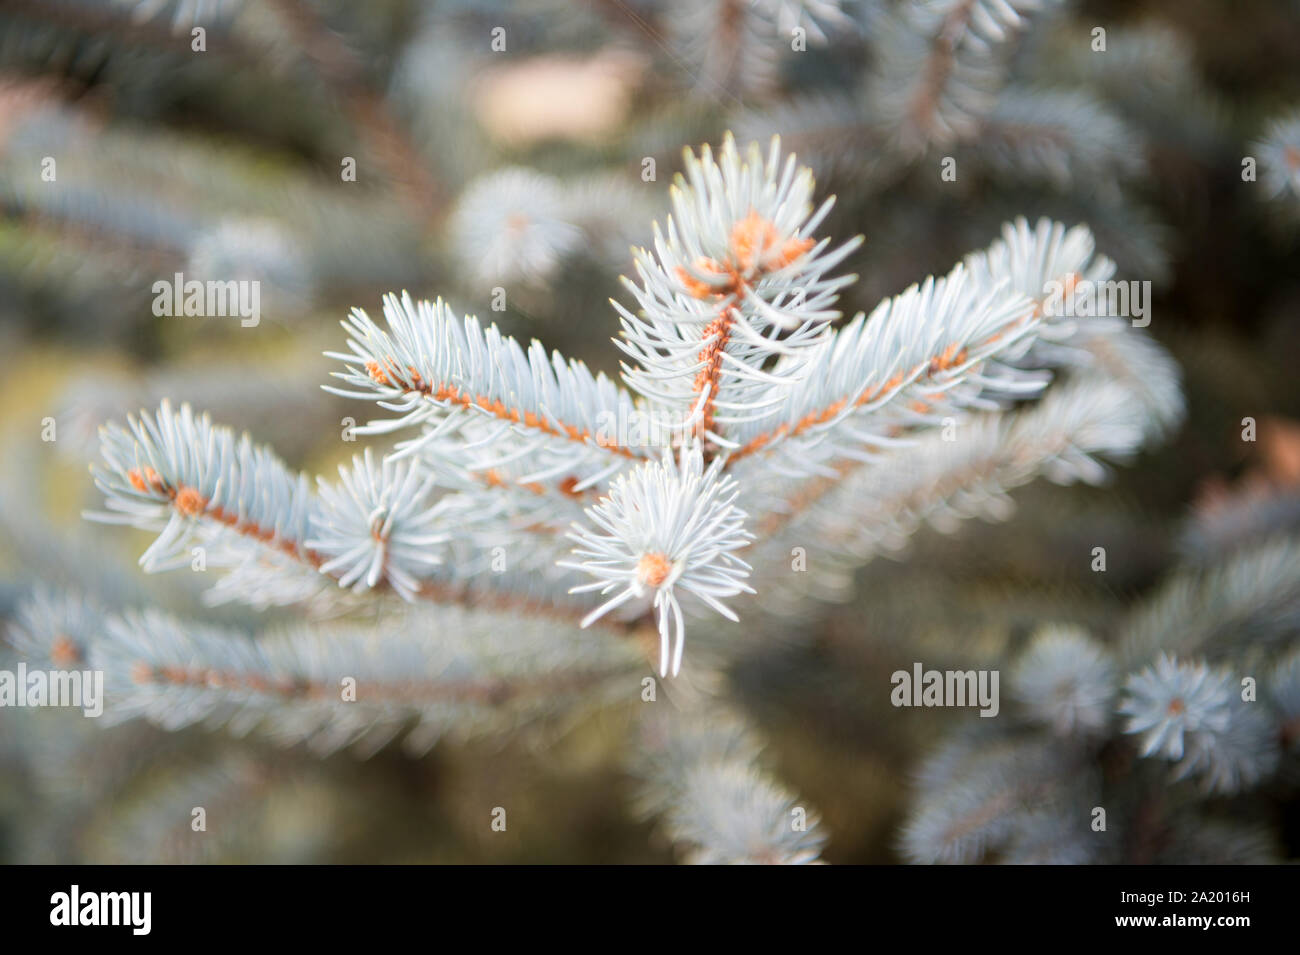 Christmas season is coming. Coniferous evergreen spruce tree. Spruce or conifer plant. Spruce fir or needles on blurred natural background. Branches of pine spruce. Holiday celebration. Stock Photo